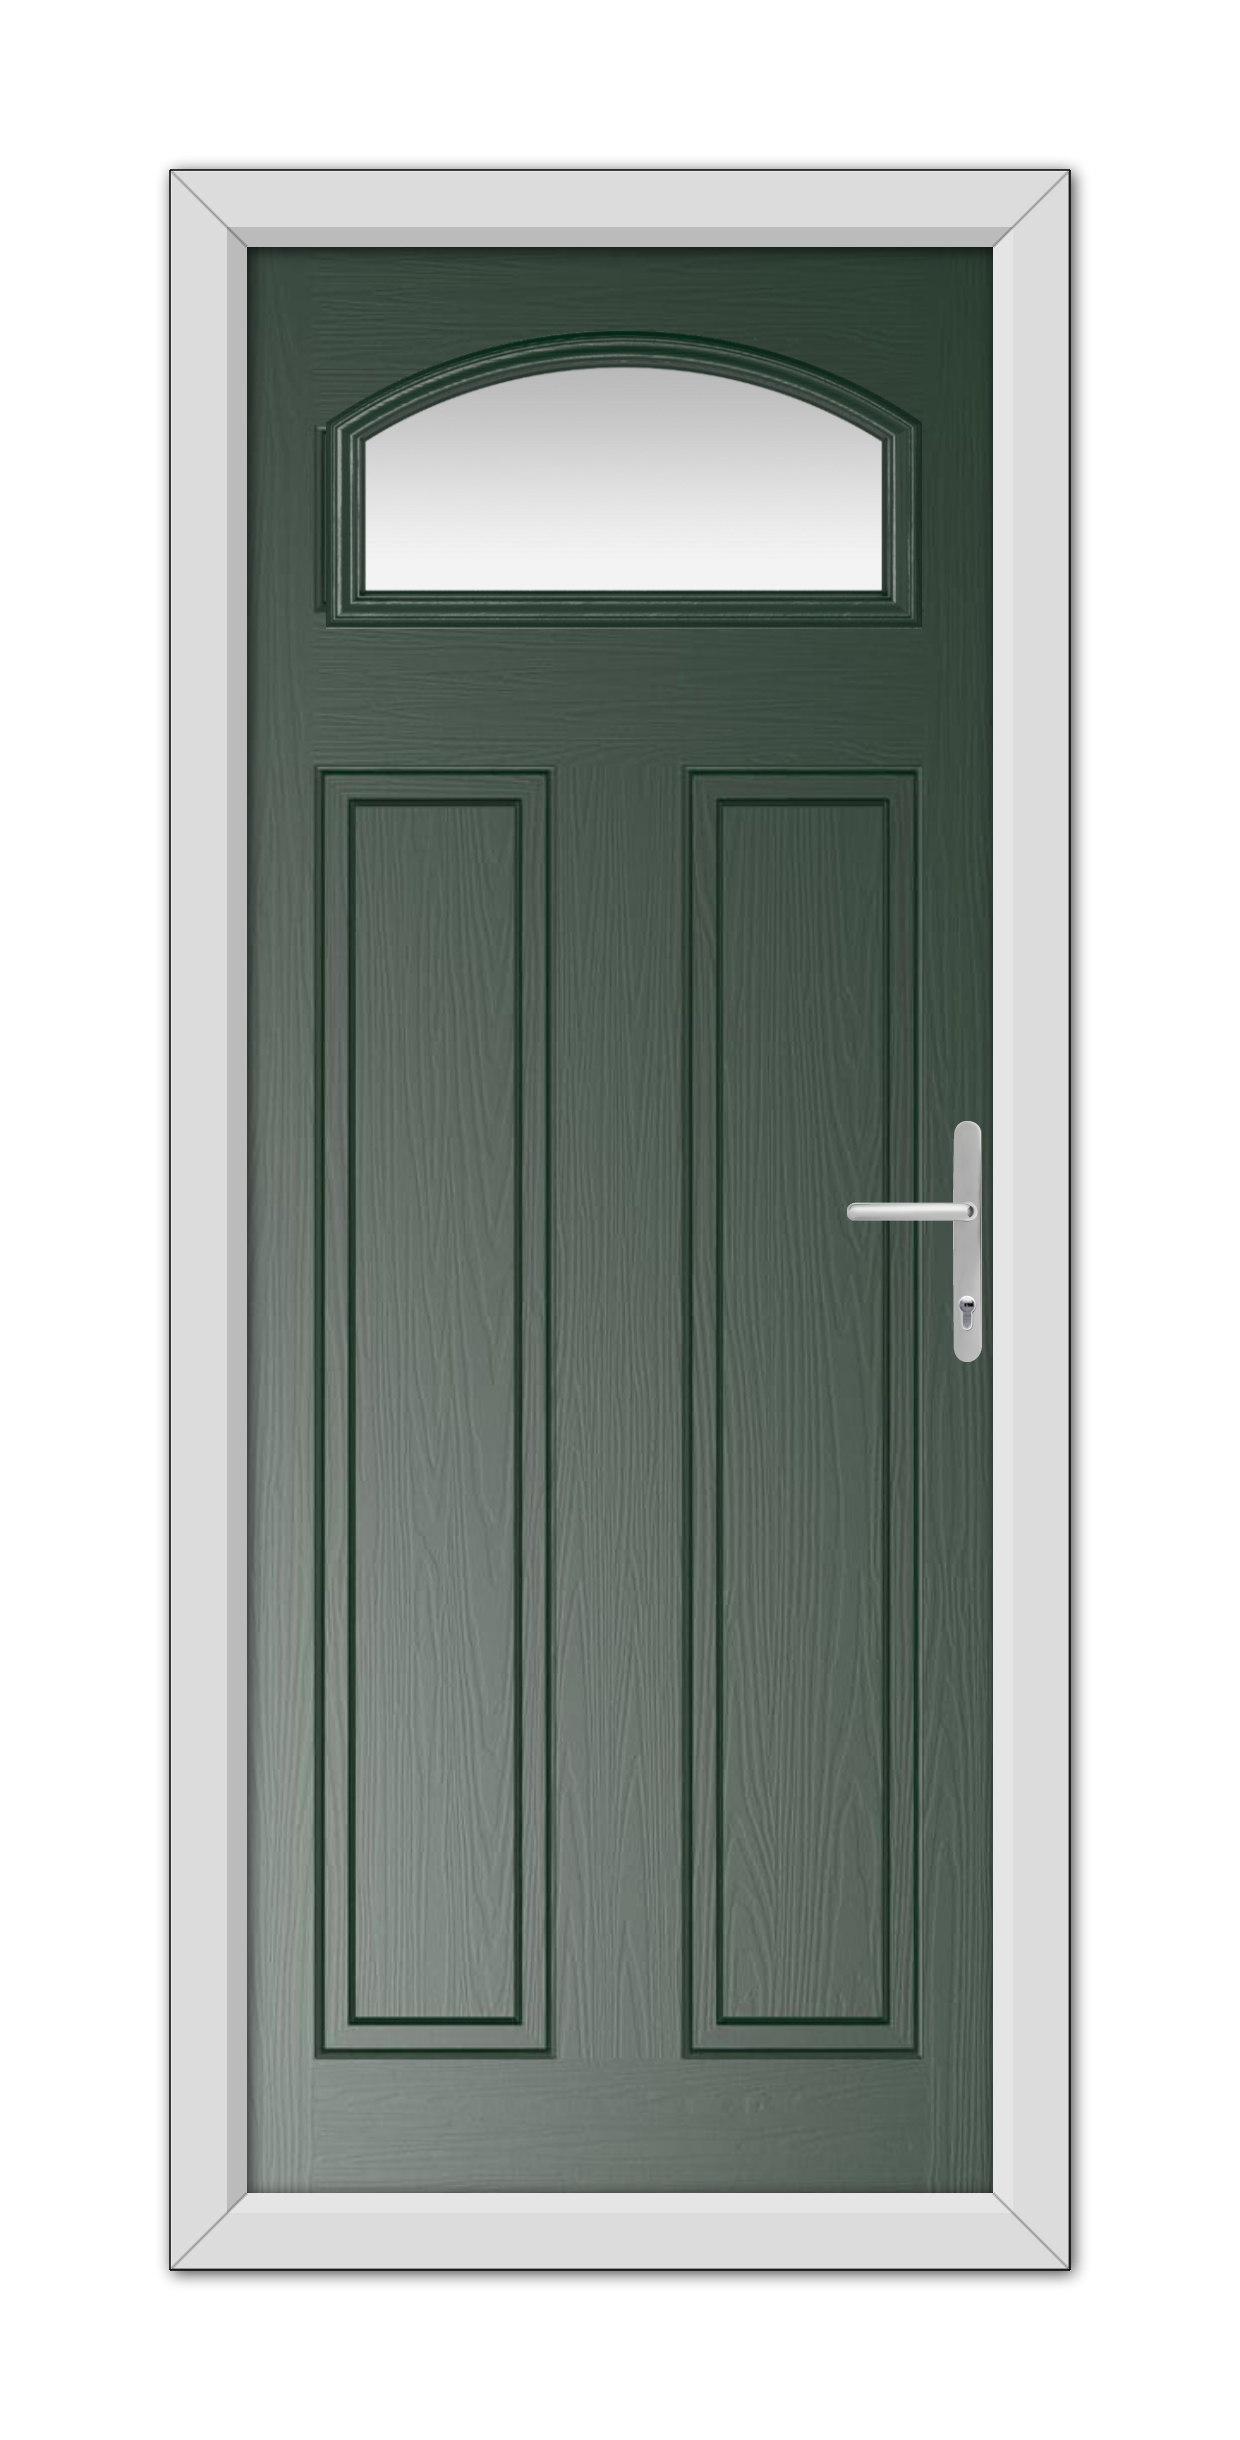 A Green Harlington Composite Door 48mm Timber Core with a white frame and an arched window above, featuring a modern handle on the right.